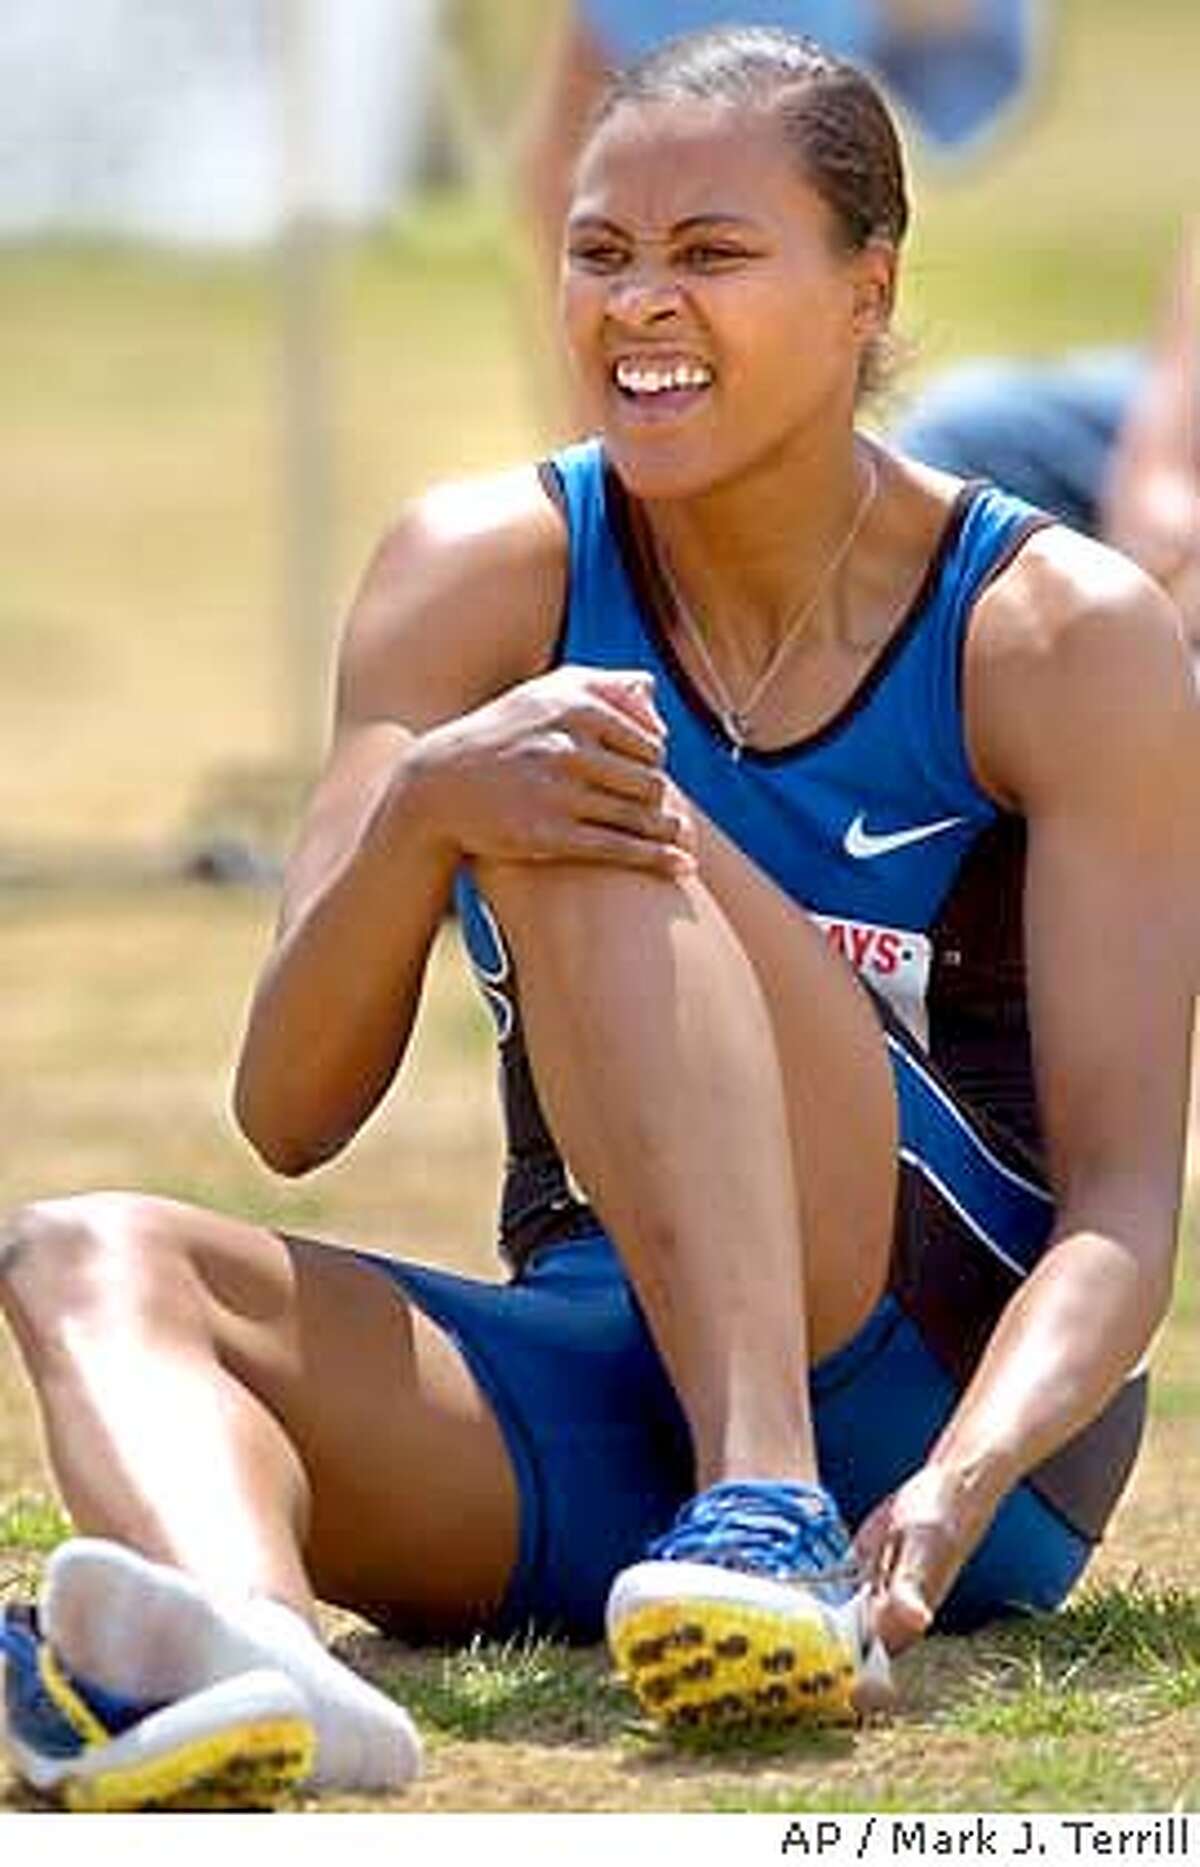 Marion Jones takes her shoes off after the Women's 200 Meter Dash Invitational at the Mt. SAC Relays, Sunday, April 18, 2004, at Mt. San Antonio College in Walnut, Calif. Connie Moore won the race while Jones finished fourth with a time of 22.02. (AP Photo/Mark J. Terrill)